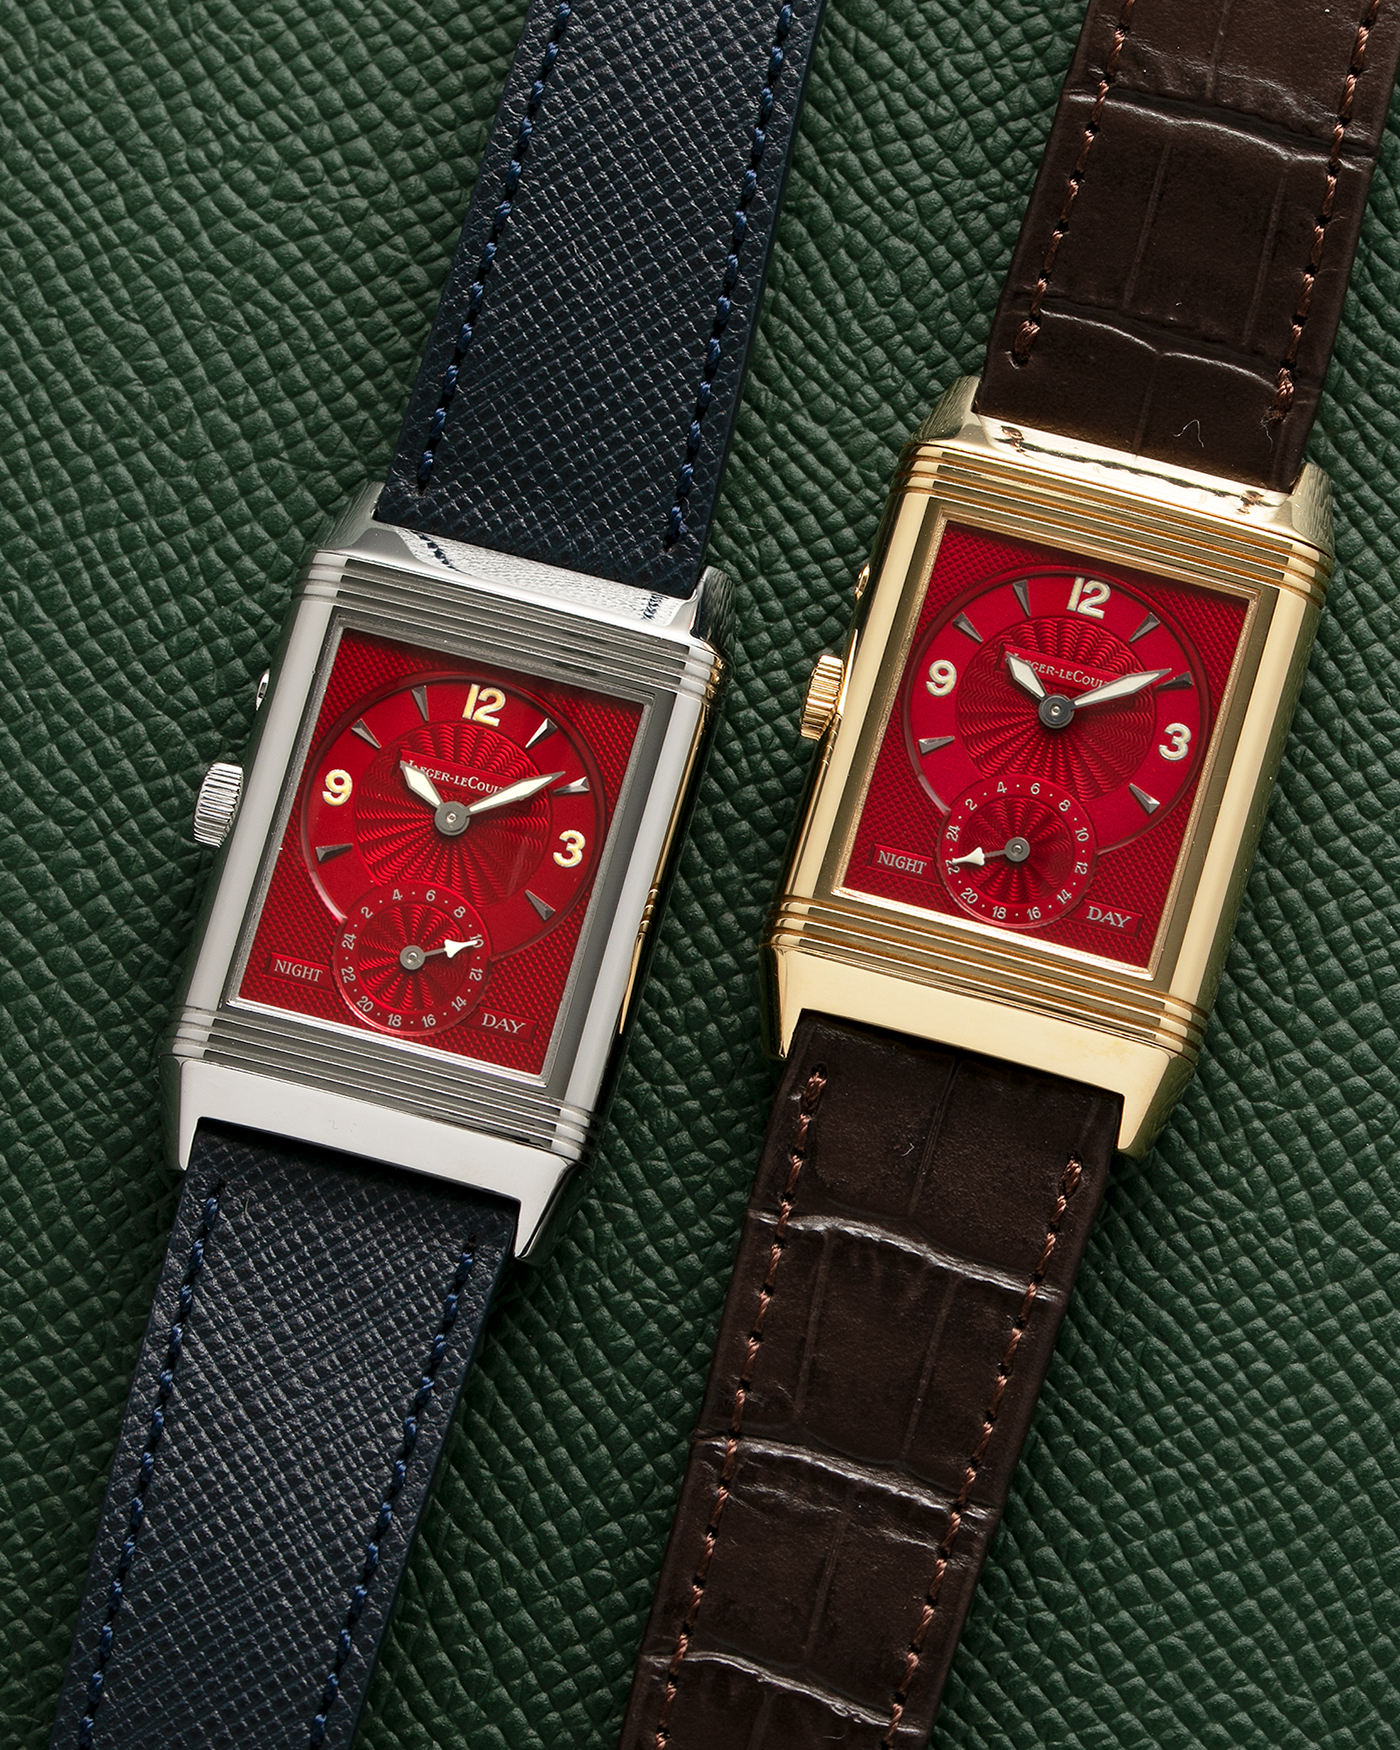 Jaeger-LeCoultre Duoface Reverso Japan Edition Red 270.1.54 YG